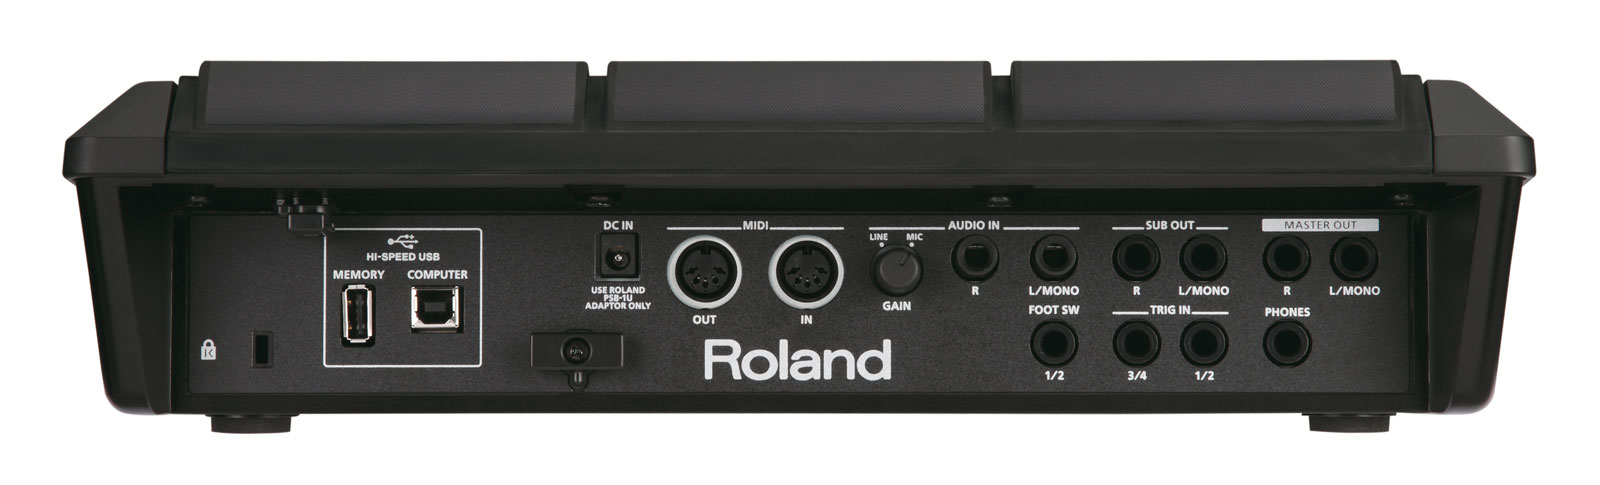 Roland SPD-SX Sampling Pad: Canadian Online Music Store in